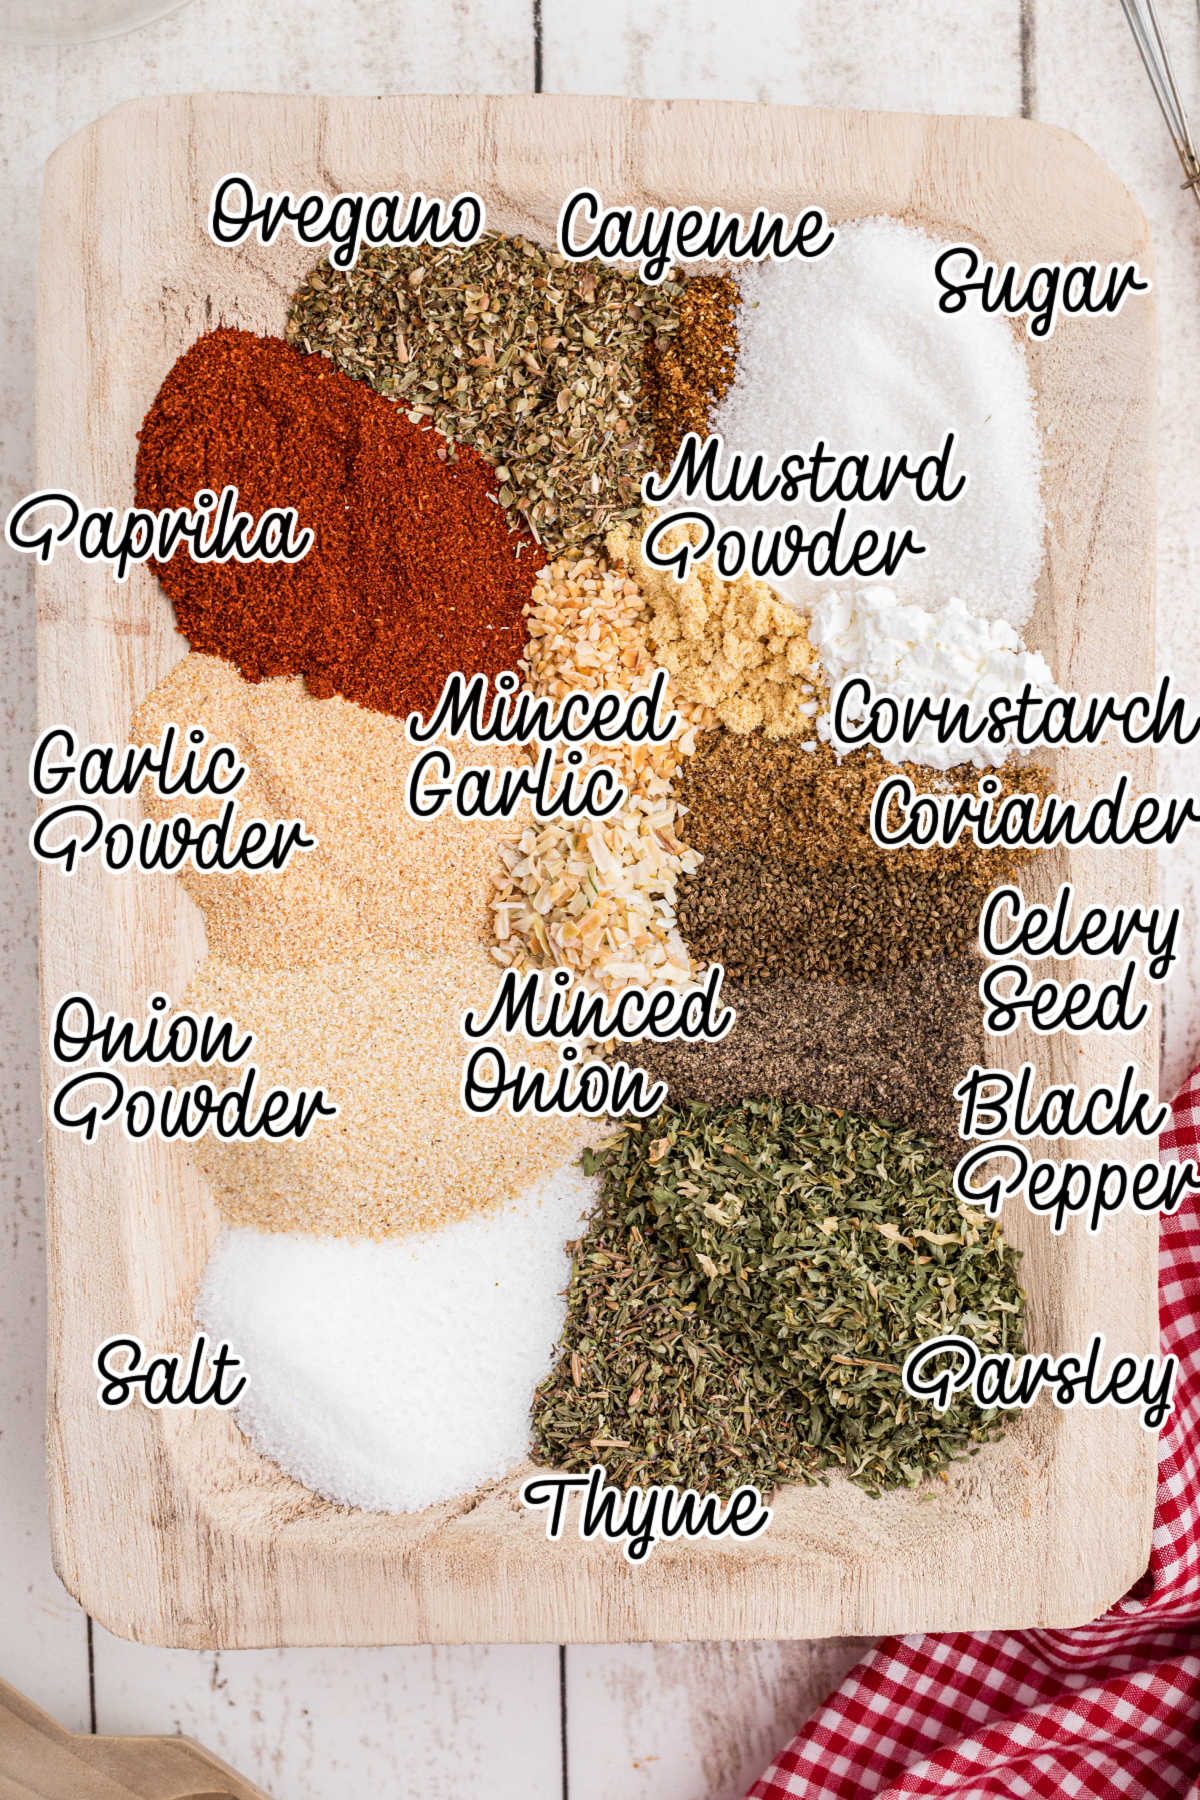 All Purpose Seasoning ingredients laid out in a bowl with text overlay.